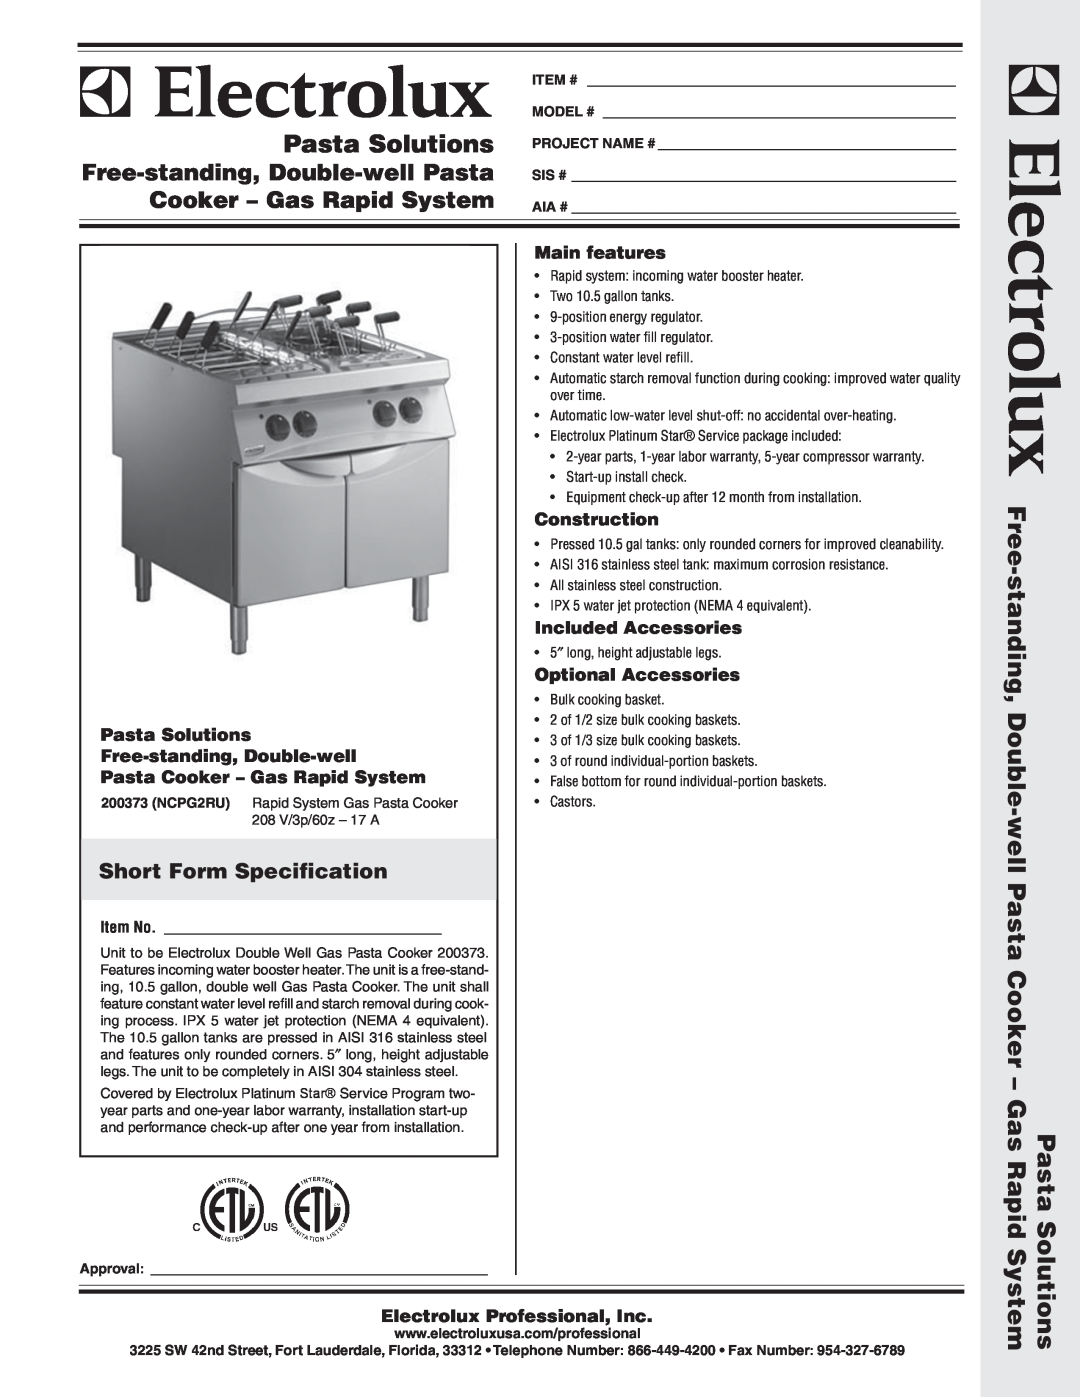 Electrolux 200373, NCPG2RU warranty Short Form Specification, Solutions System, Pasta Solutions Free-standing, Double-well 